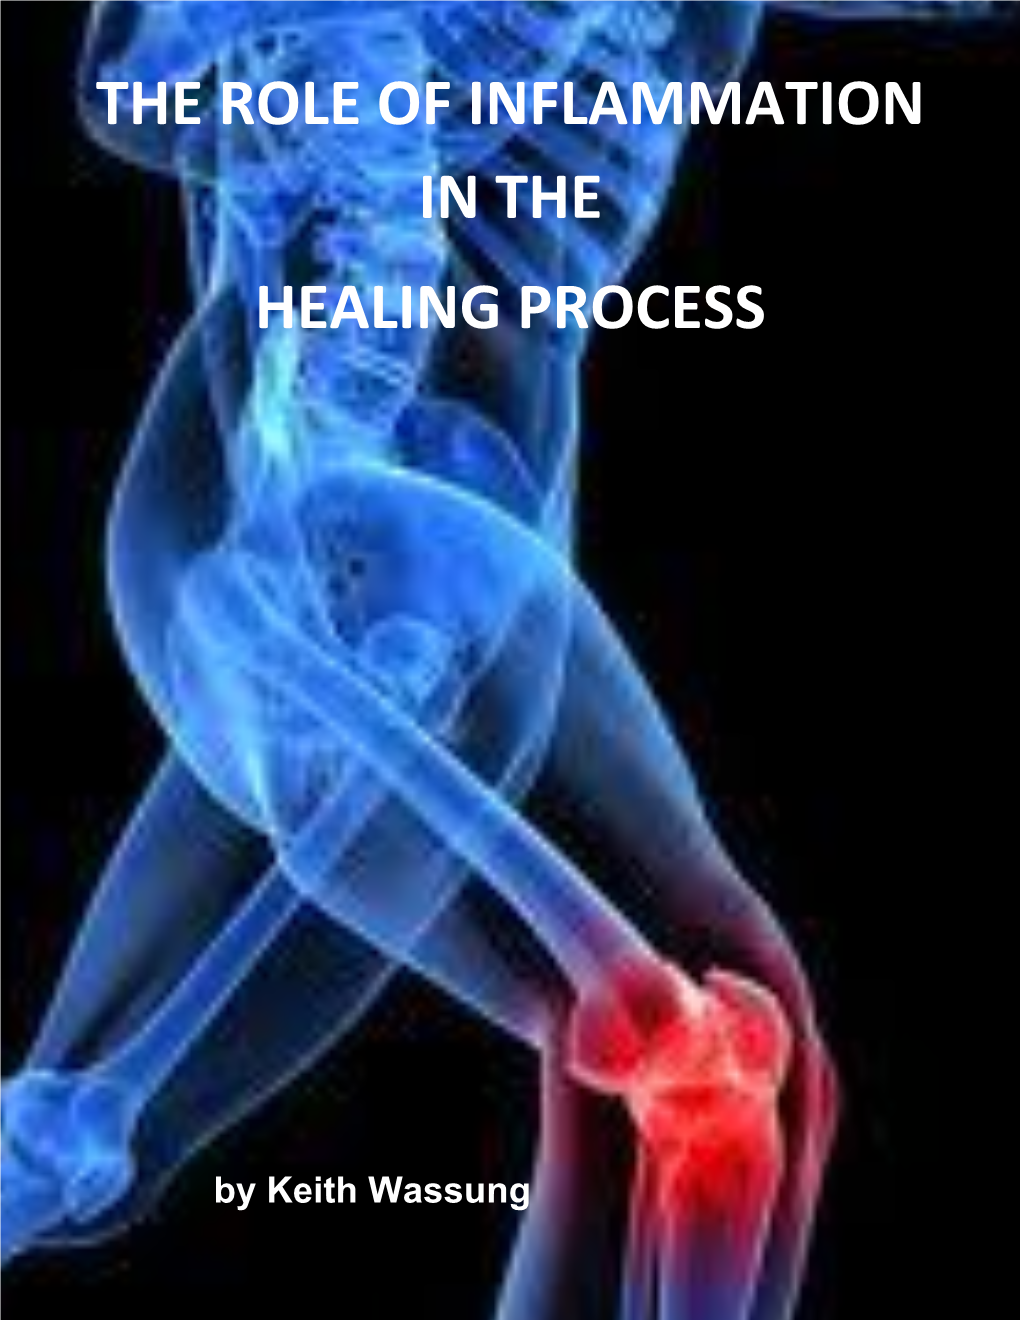 The Role of Inflammation in the Healing Process